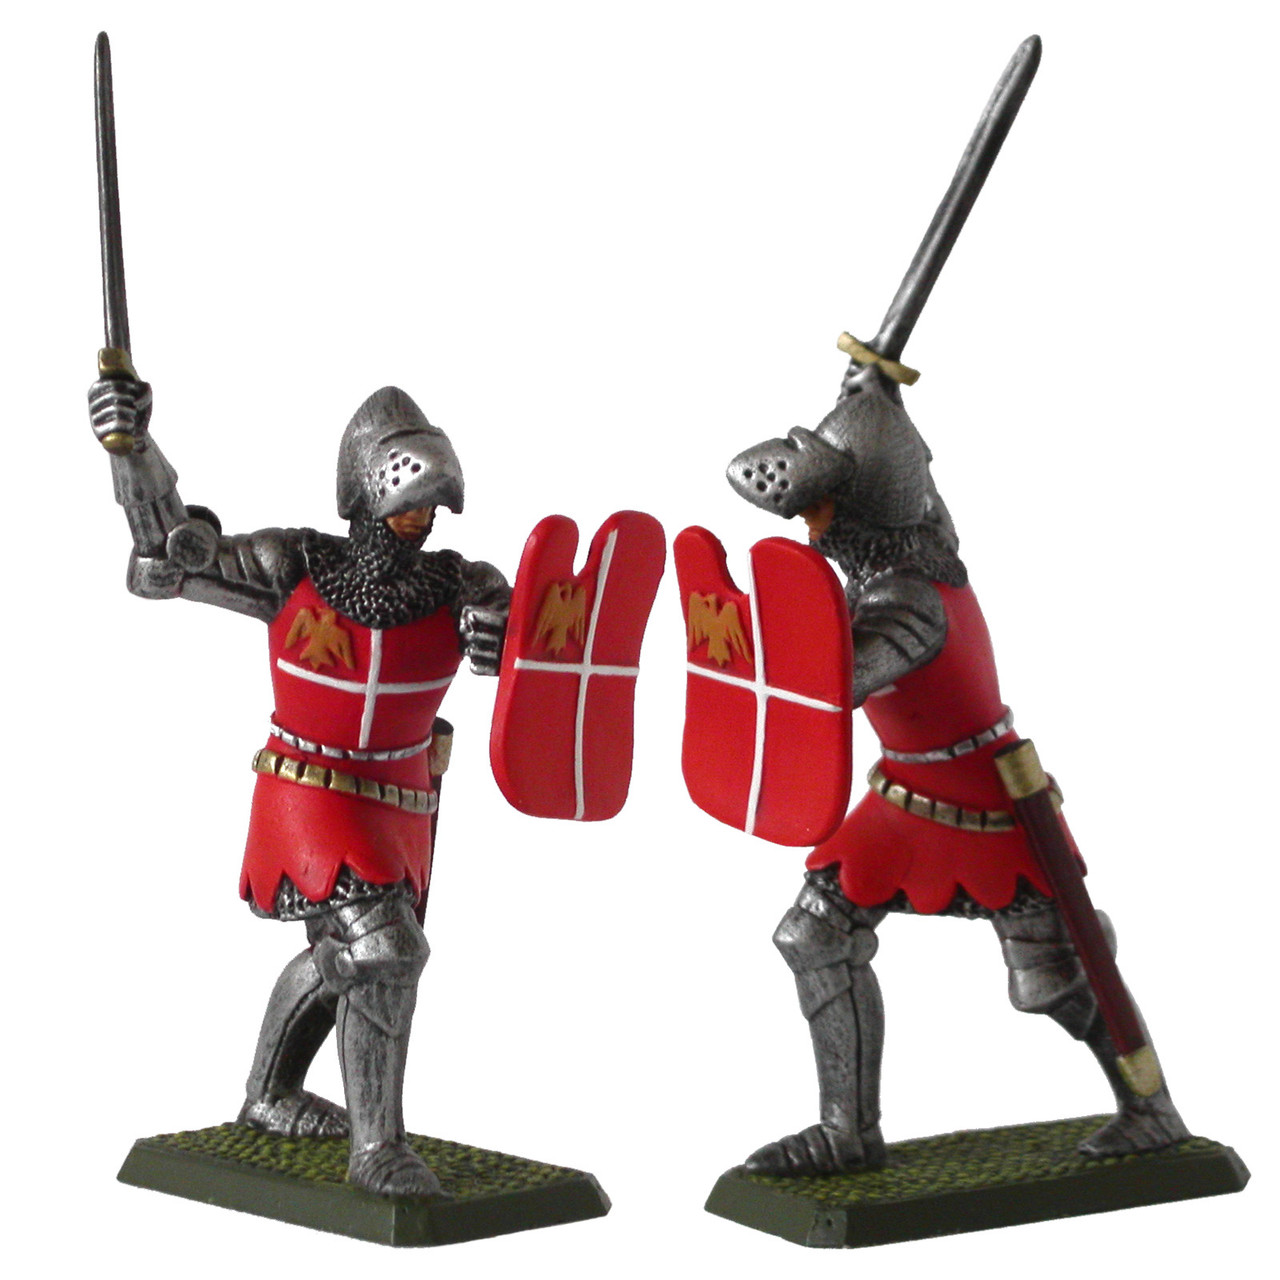 54mm Medieval Knights metal casting rubber Prince August moulds molds PA420 